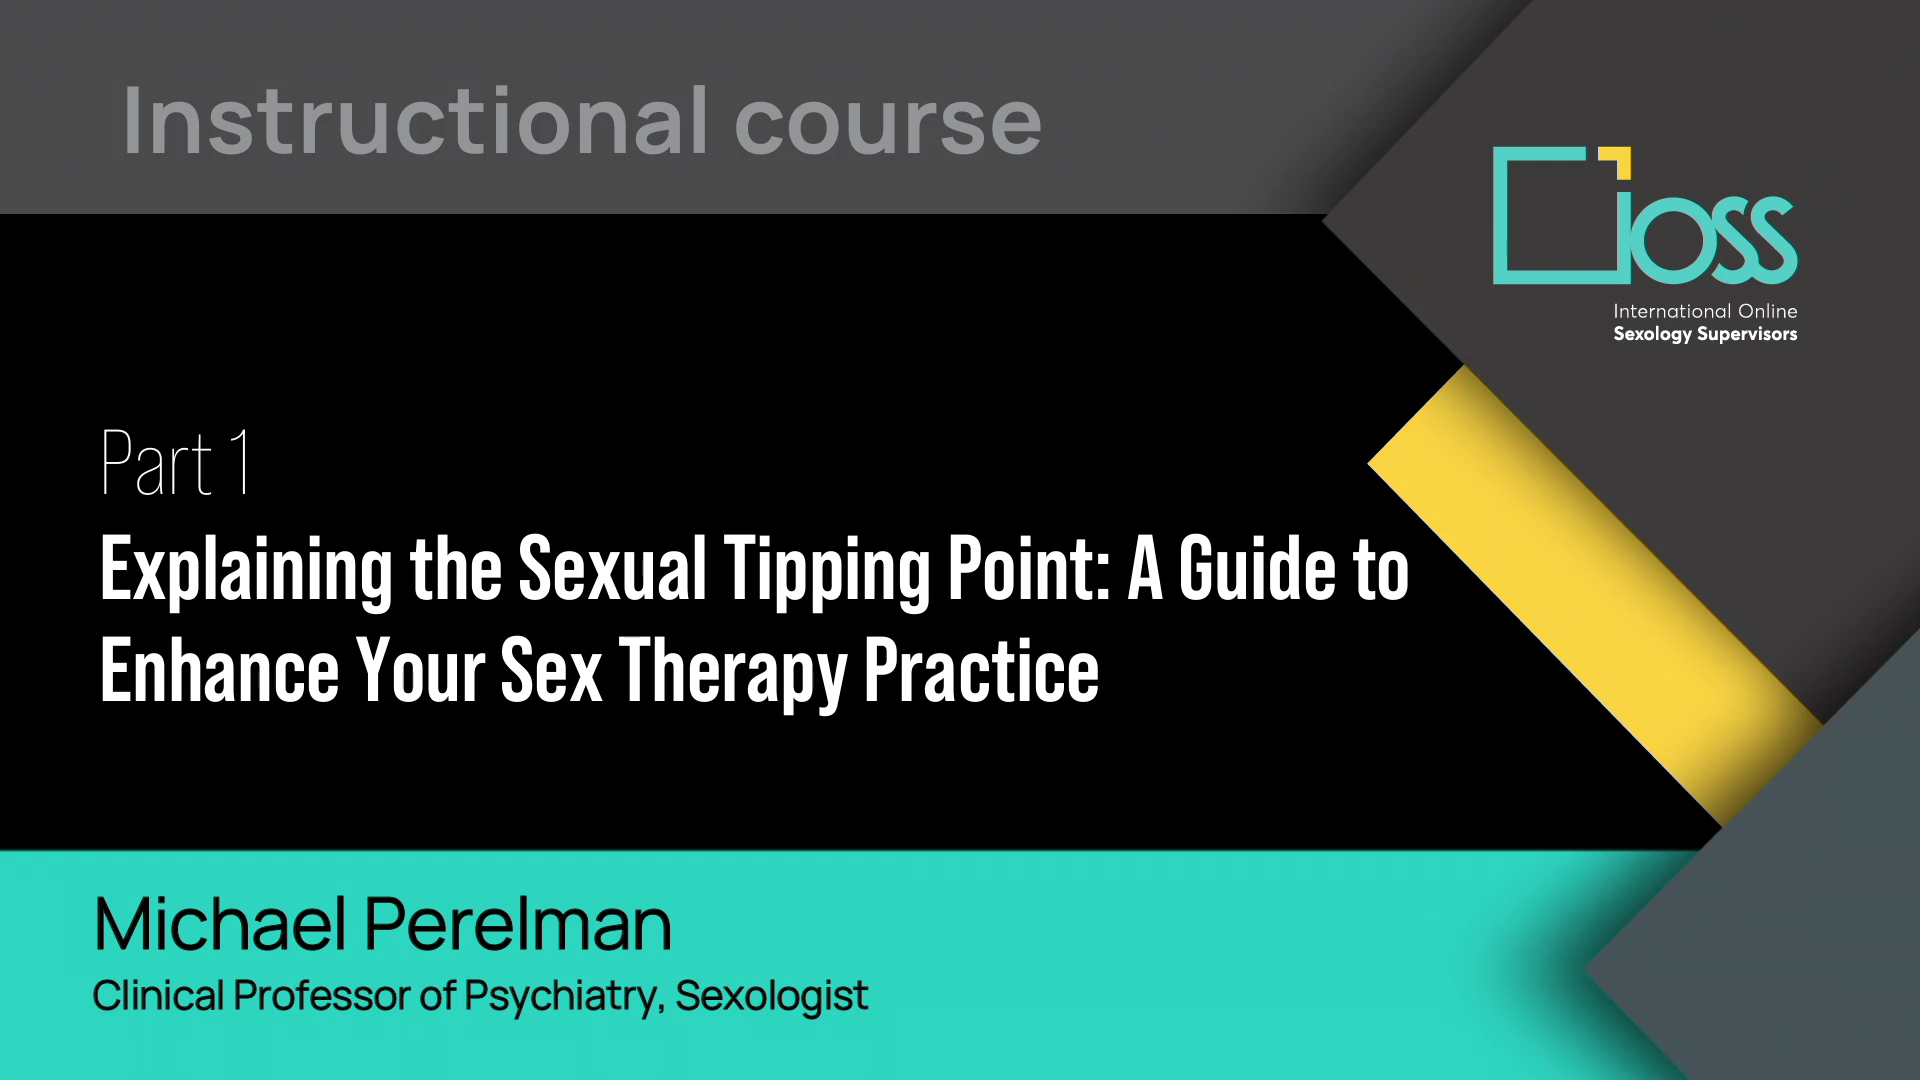 Part 1 Explaining the Sexual Tipping Point: A Guide to Enhance Your Sex Therapy Practice (Part 1 & 2)